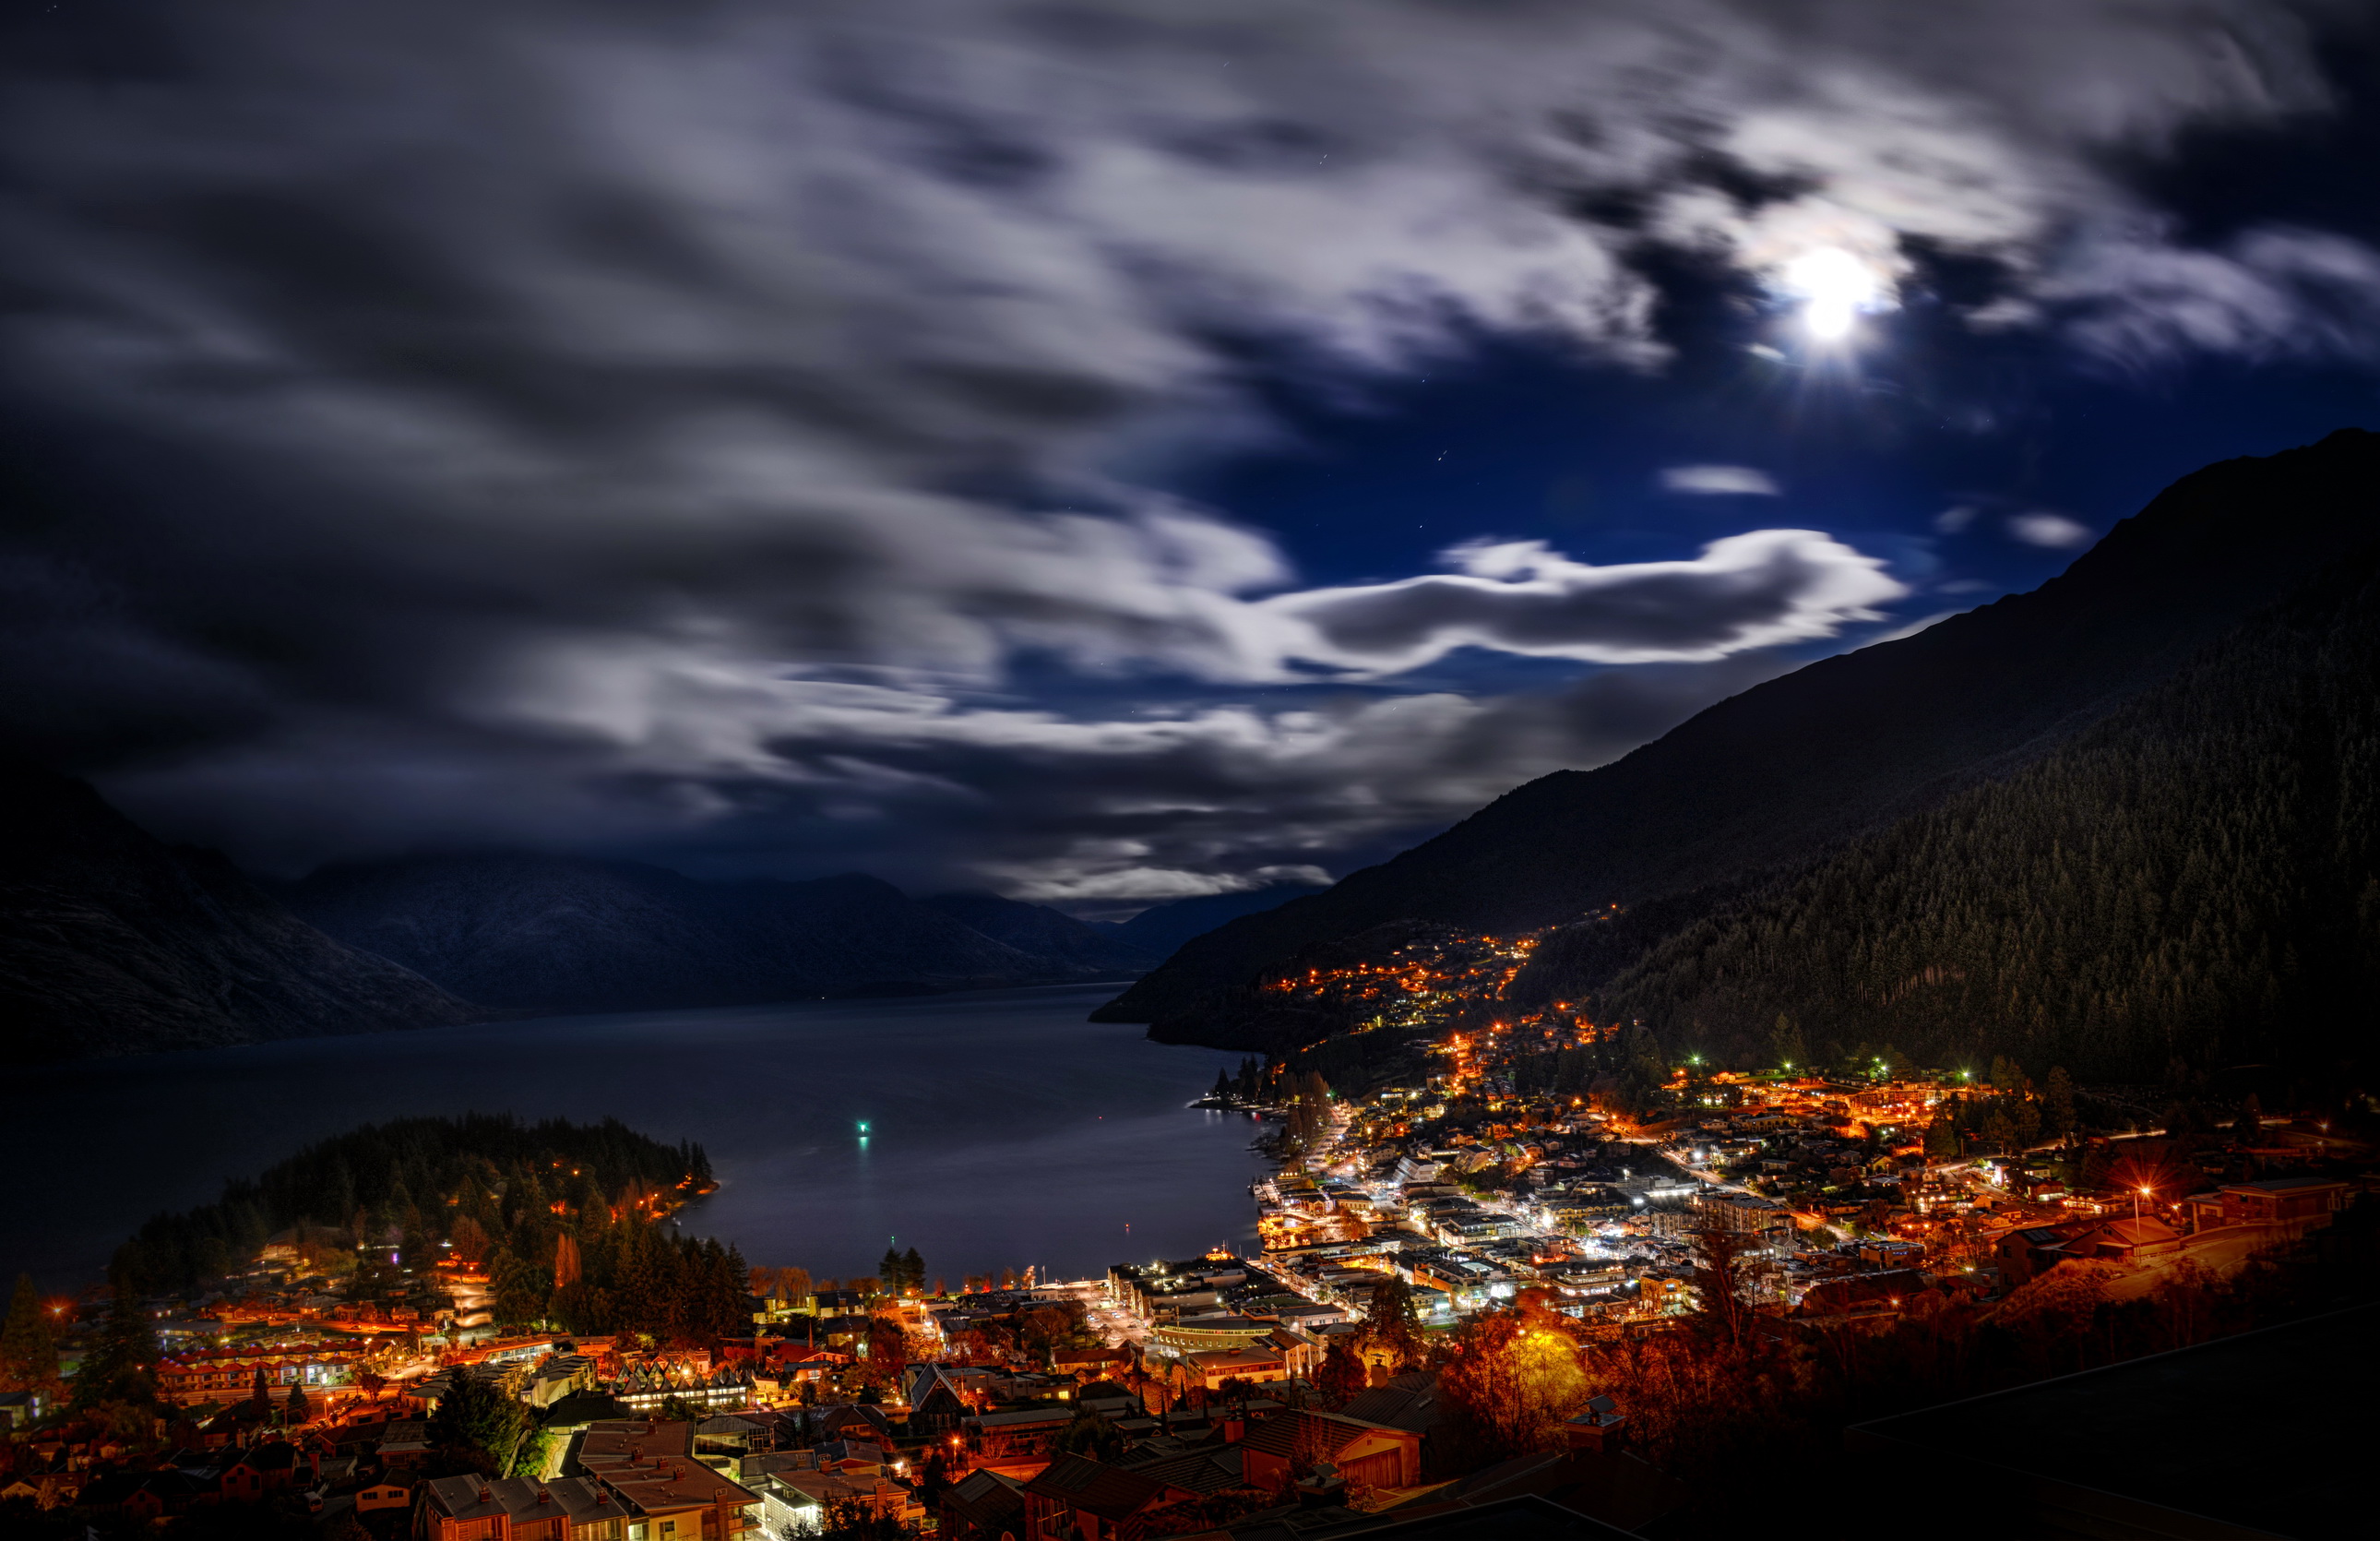 zealand, Queenstown, Cities, Architecture, Buildings, Harbor, Marina, Mountains, Sky, Skies, Clouds, Moon, Moonlight, Night, Lights, Hdr Wallpaper